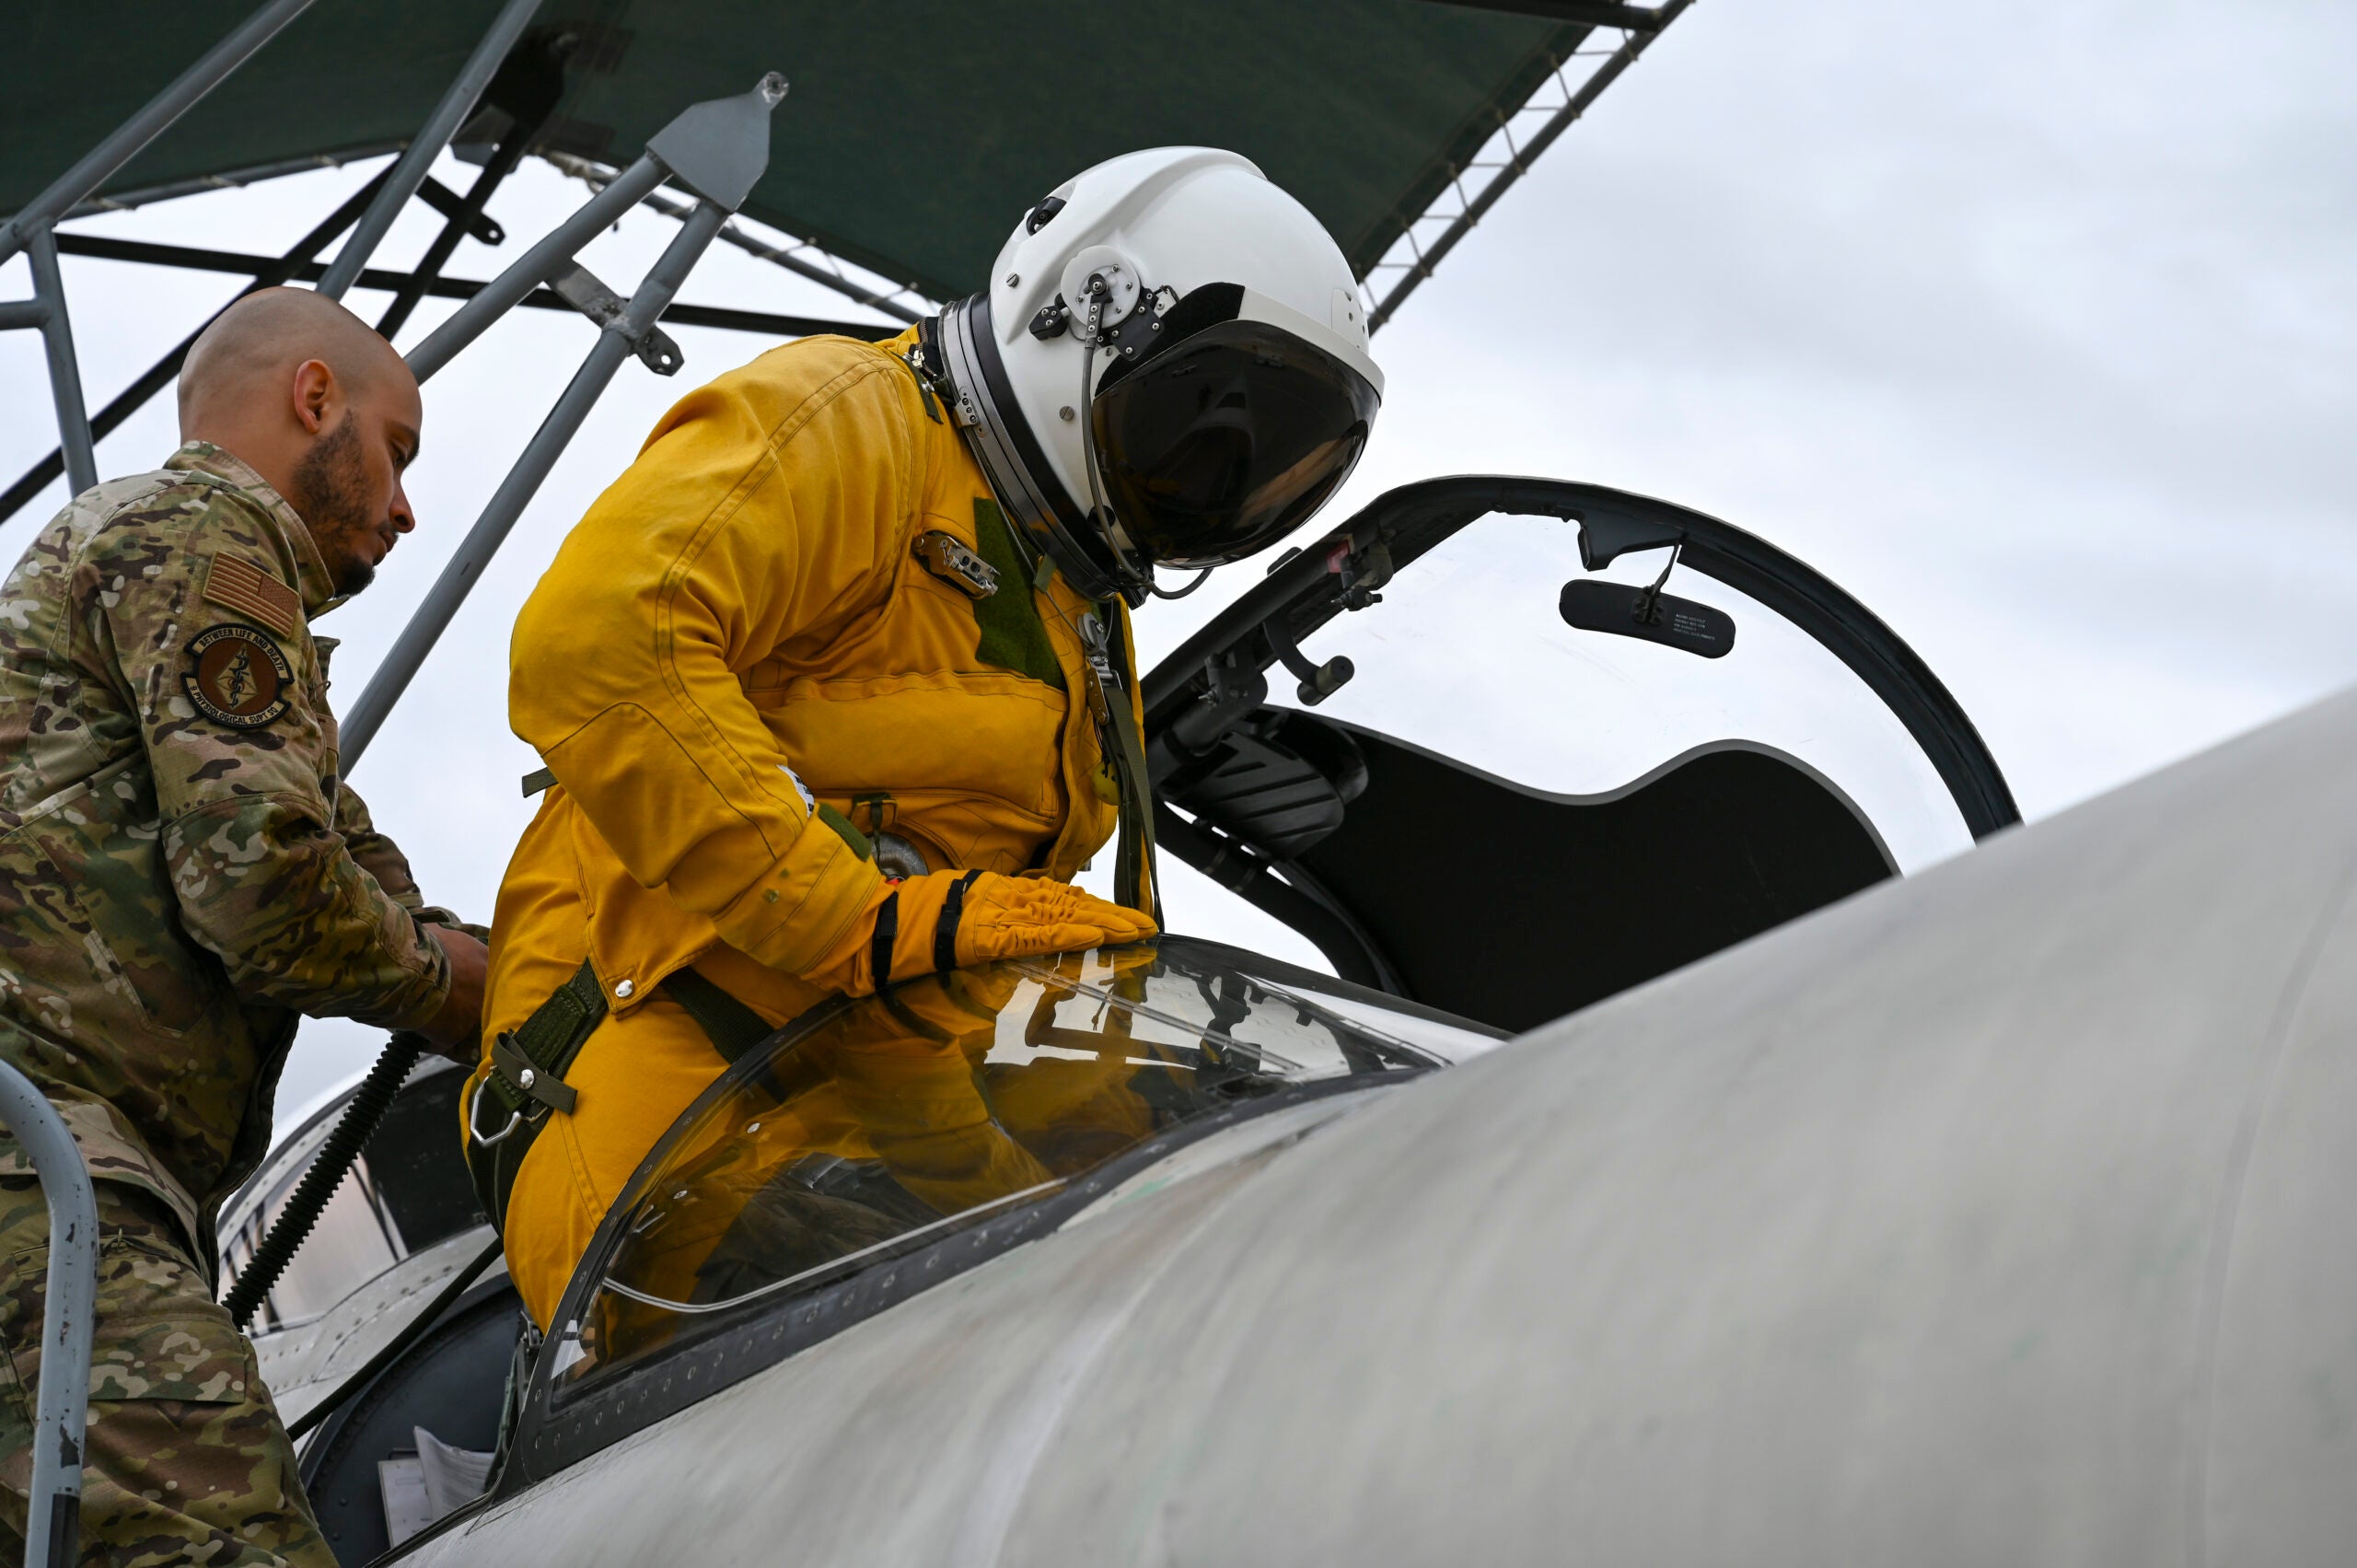 U.S. Air Force Maj. Brandon, Air Force Life Cycle Management Center (AFLCMC) Detachment 4 chief of flight test operations, prepares to pilot TU-2S Dragon Lady 1078 at Beale Air Force Base, California, Feb. 29, 2024. After passing a series of tests, including a low flight that day, aircraft 1078 was cleared to fly to U.S. Air Force Plant 42 in Palmdale, California, where Det 4 will oversee Lockheed Martin’s Program Depot-level Maintenance of aircraft 1078. (U.S. Air Force photo by Senior Airman Alexis Pentzer)